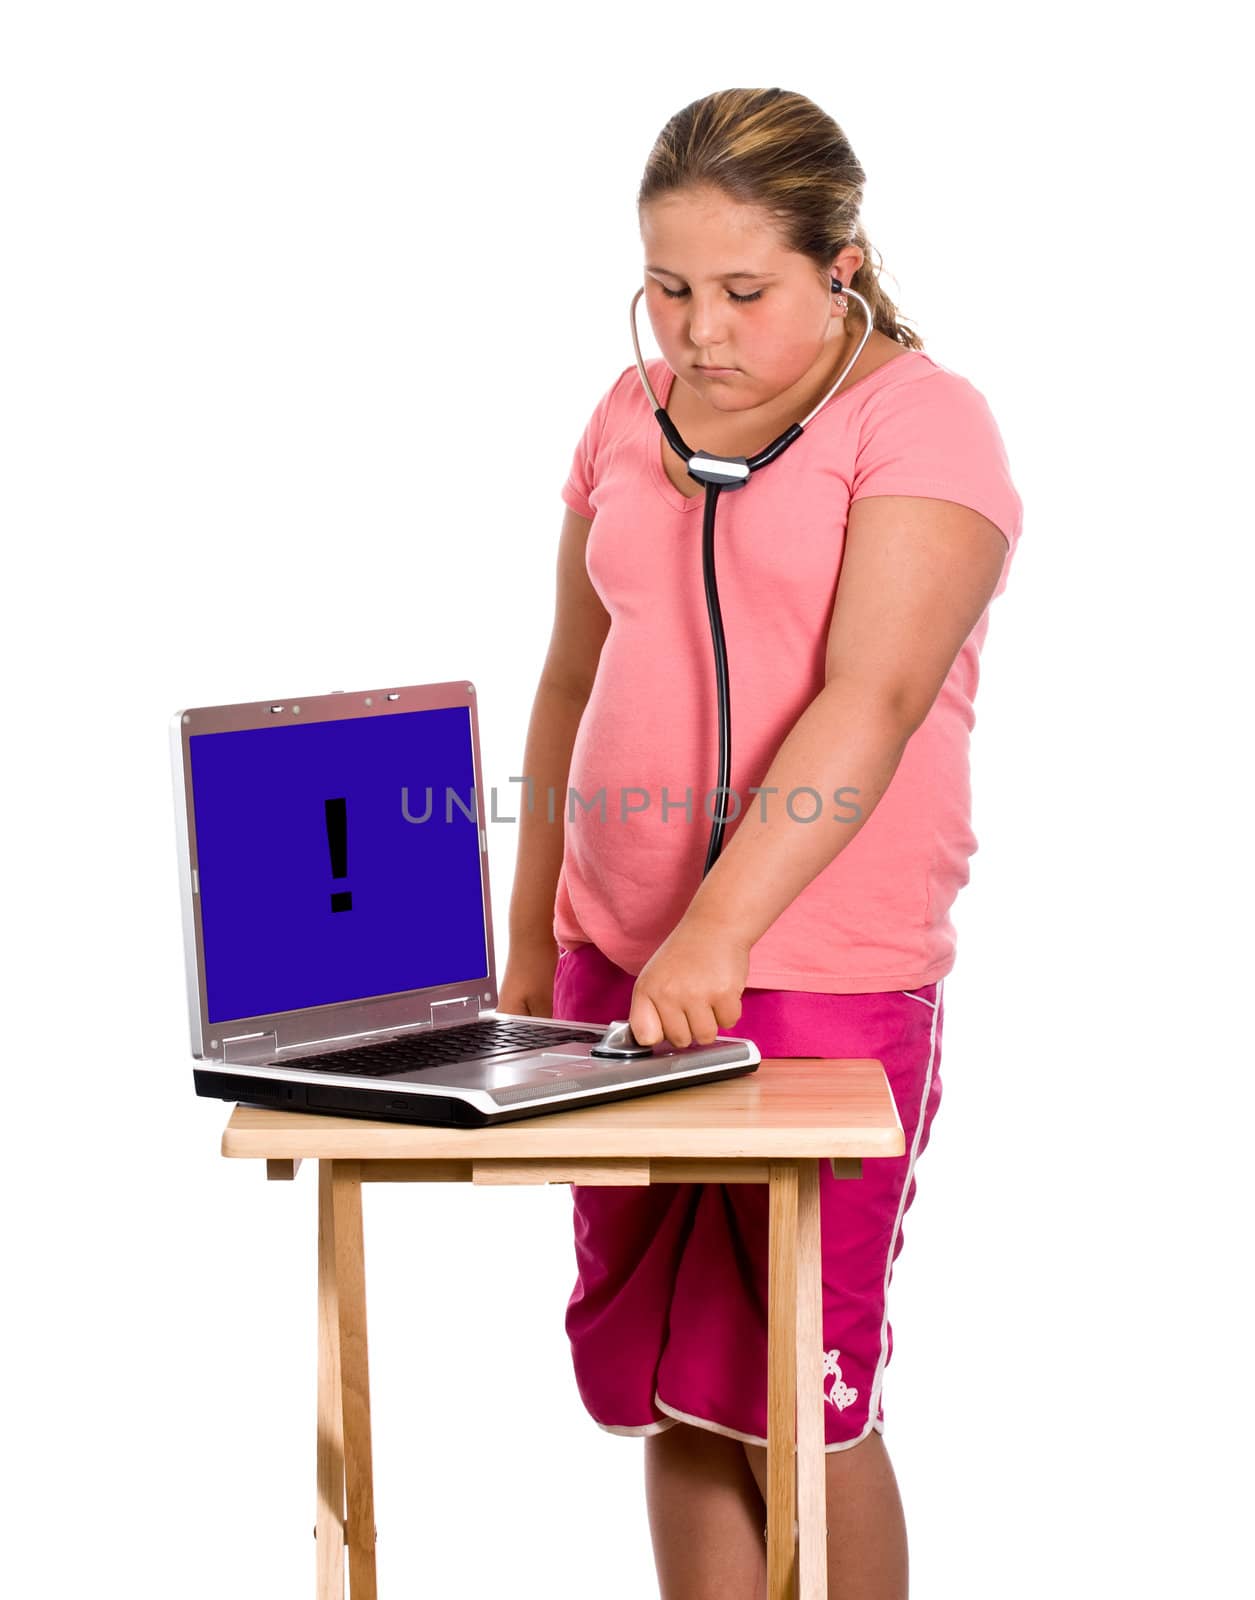 A young girl trying to diagnose a computer with a virus, by using a stethoscope, isolated against a white background